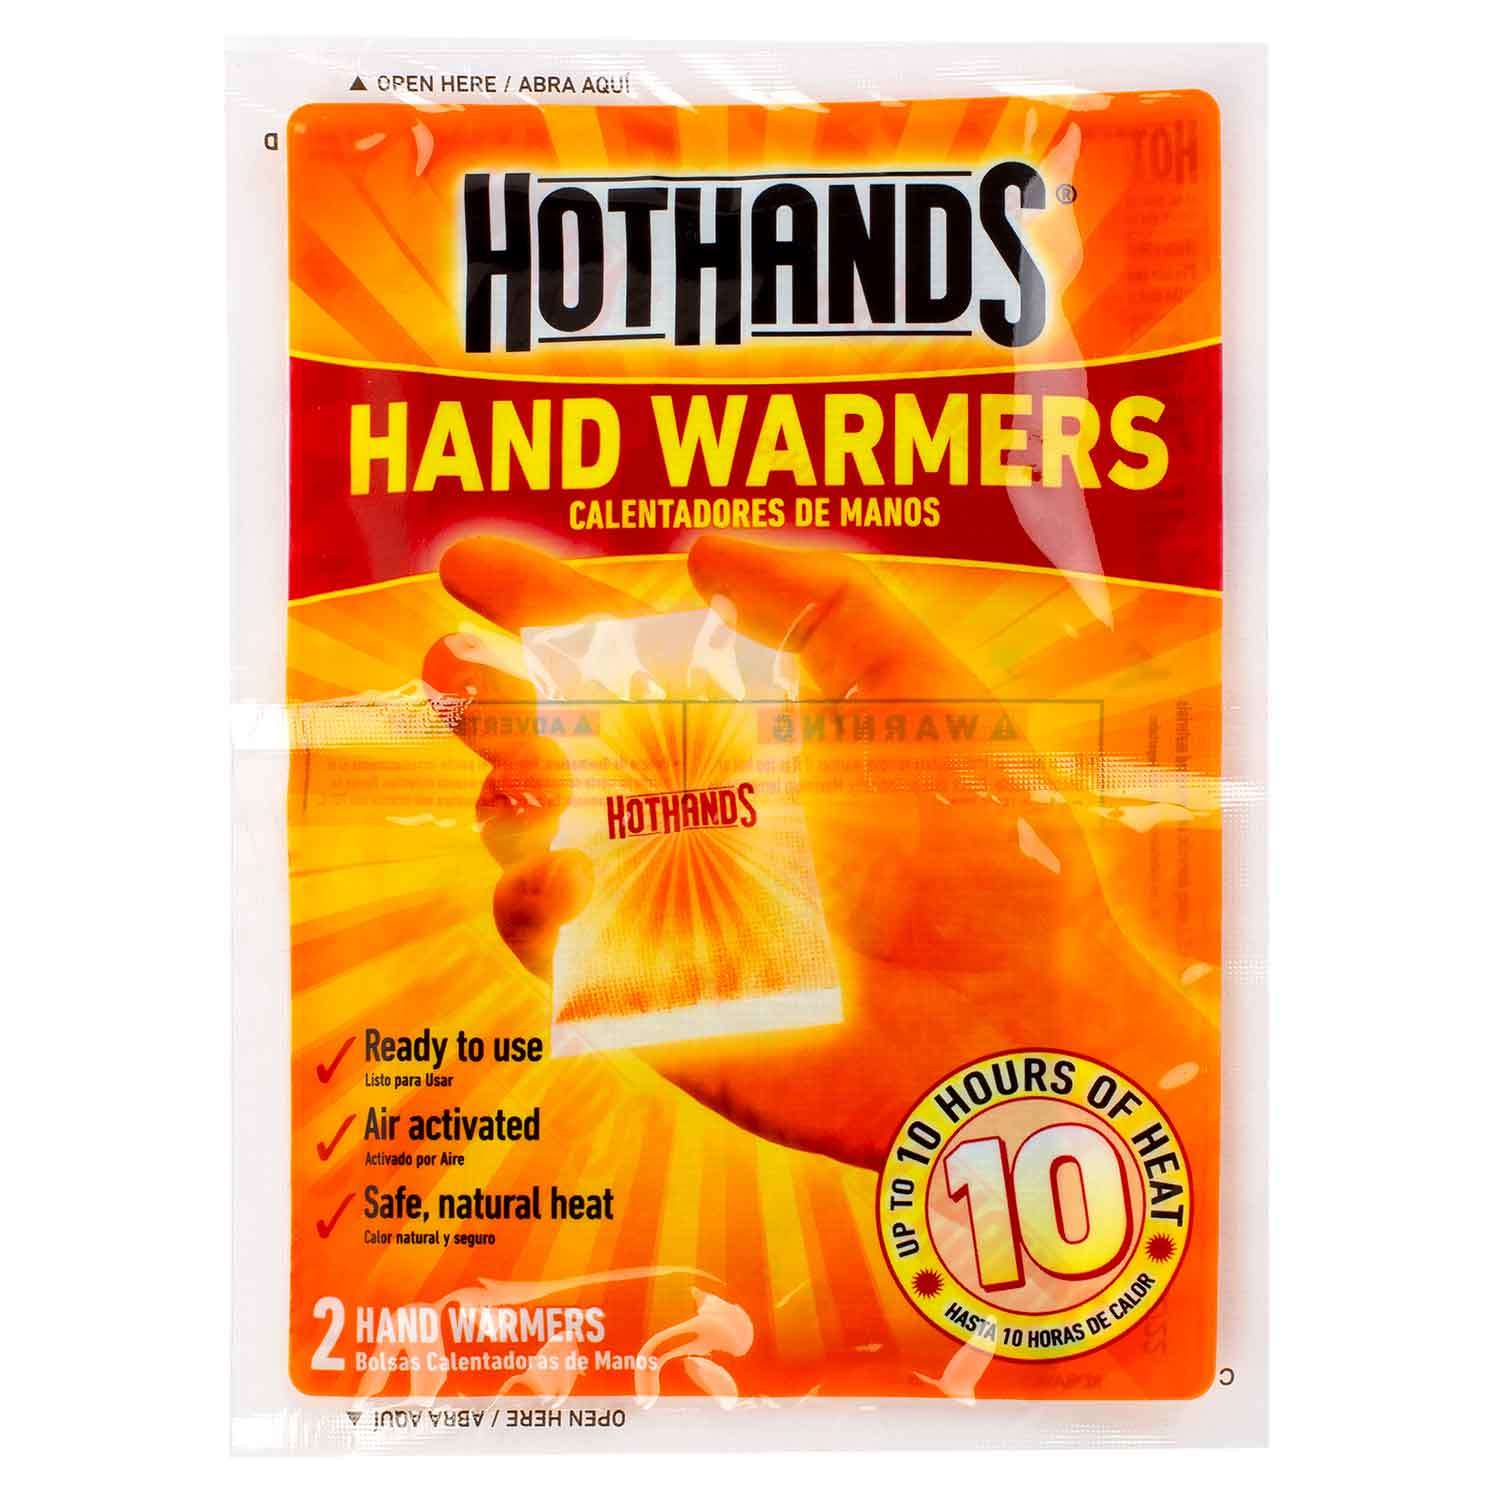 3 Pairs of Hot Hands Hand Warmers BRAND NEW SEALED Total of 6 Hand Warmers! 